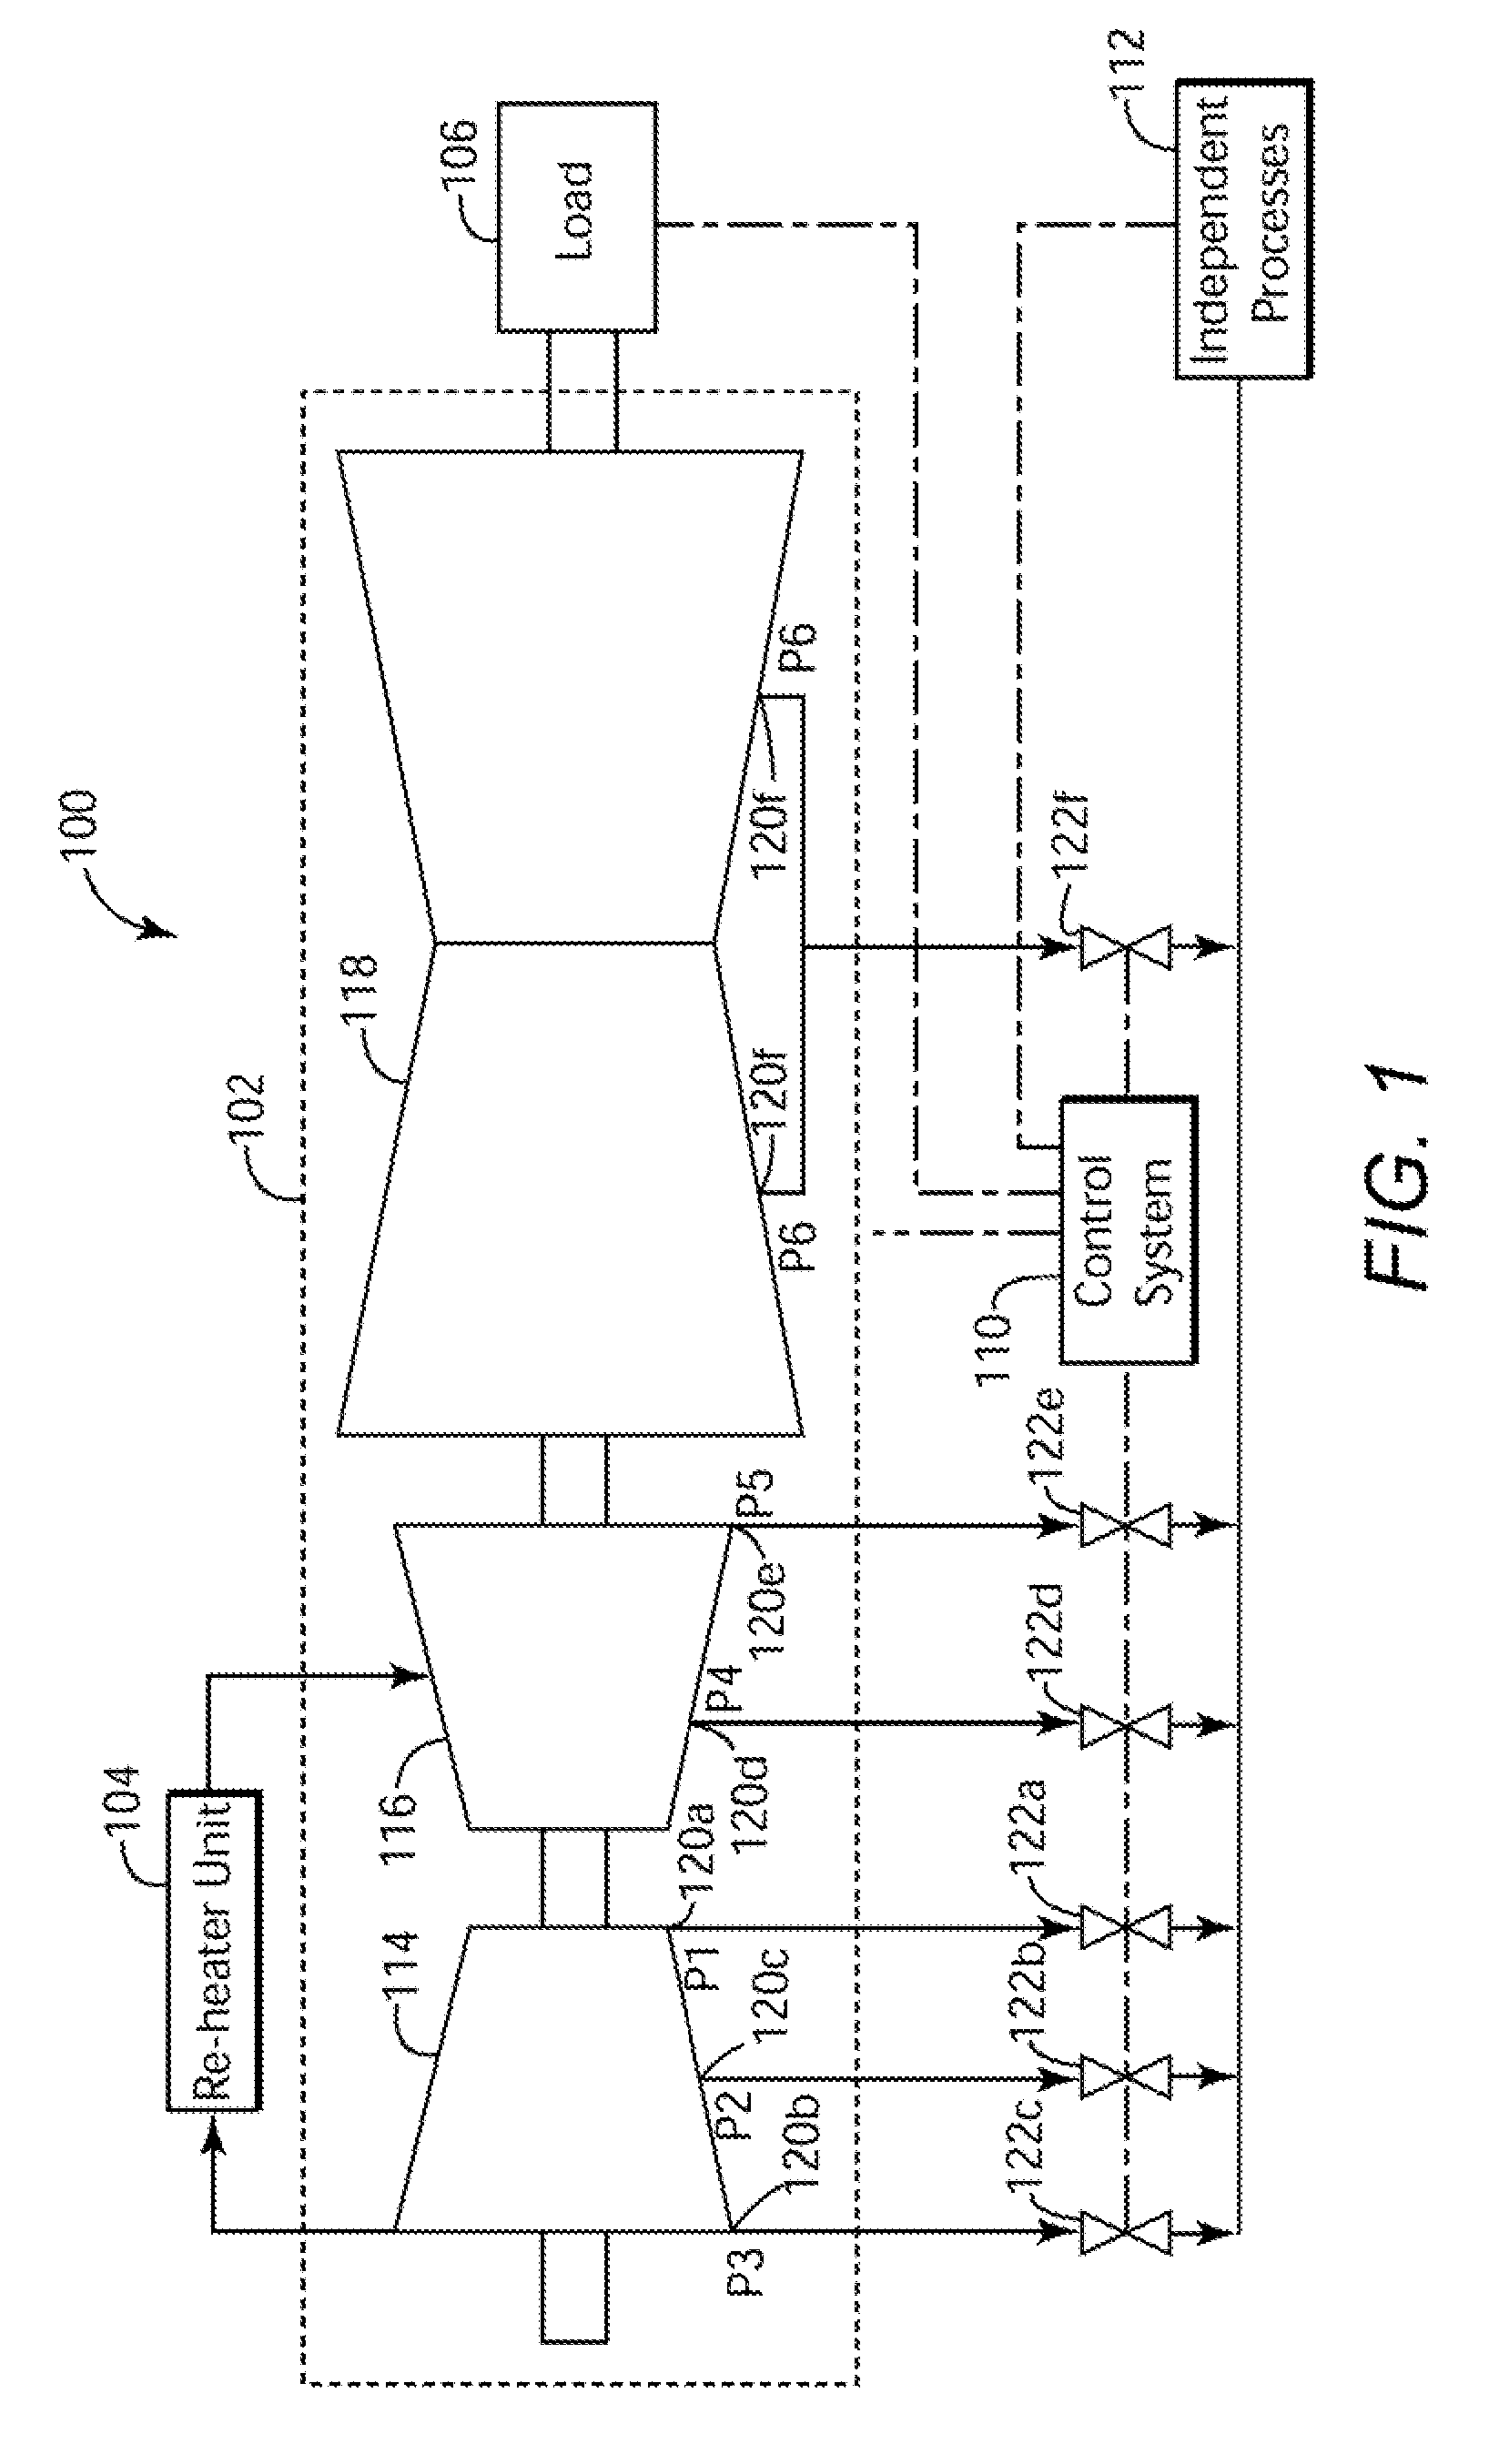 Method and system for reducing the impact on the performance of a turbomachine operating an extraction system